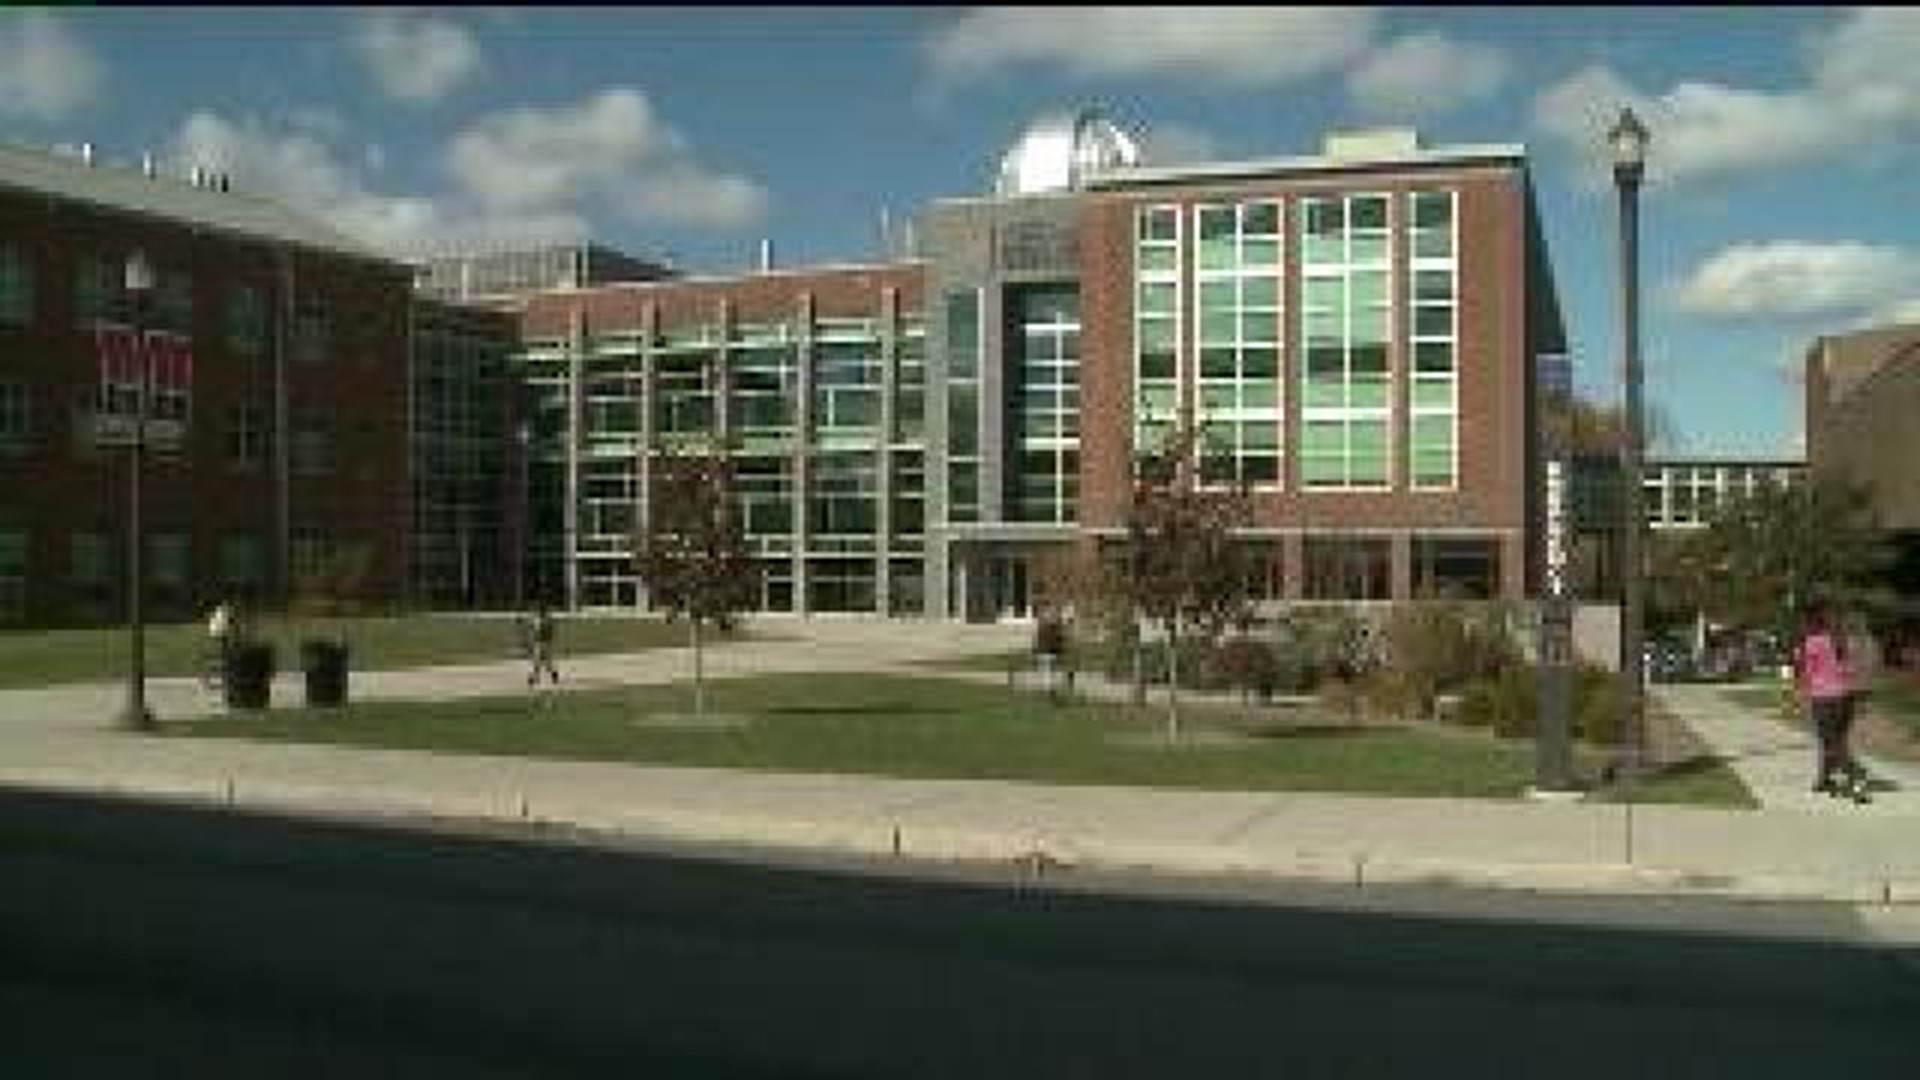 Faculty, Majors To Be Cut At East Stroudsburg University